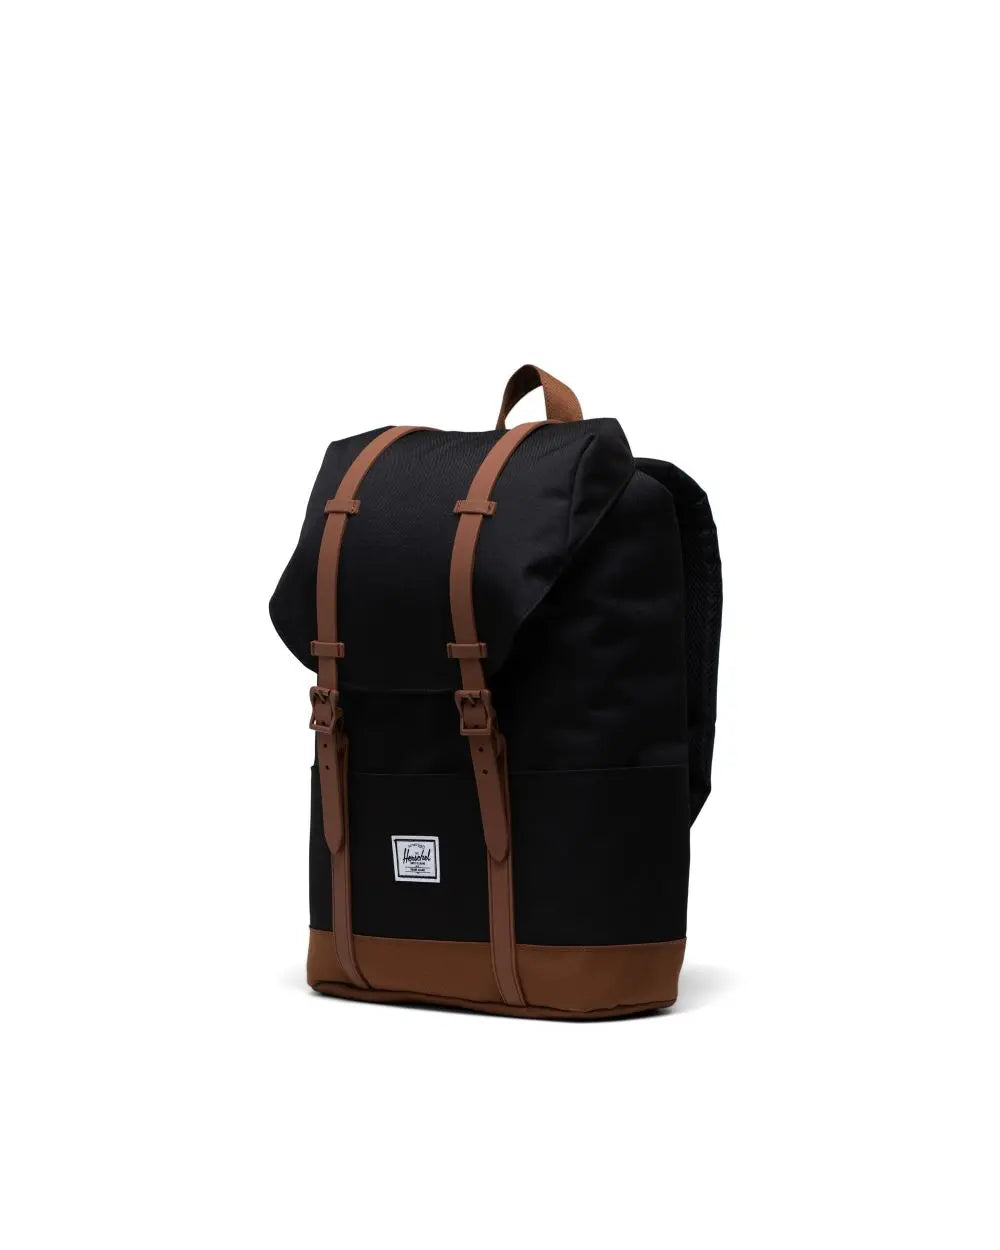 Retreat Backpack | Youth - Black/Saddle Brown